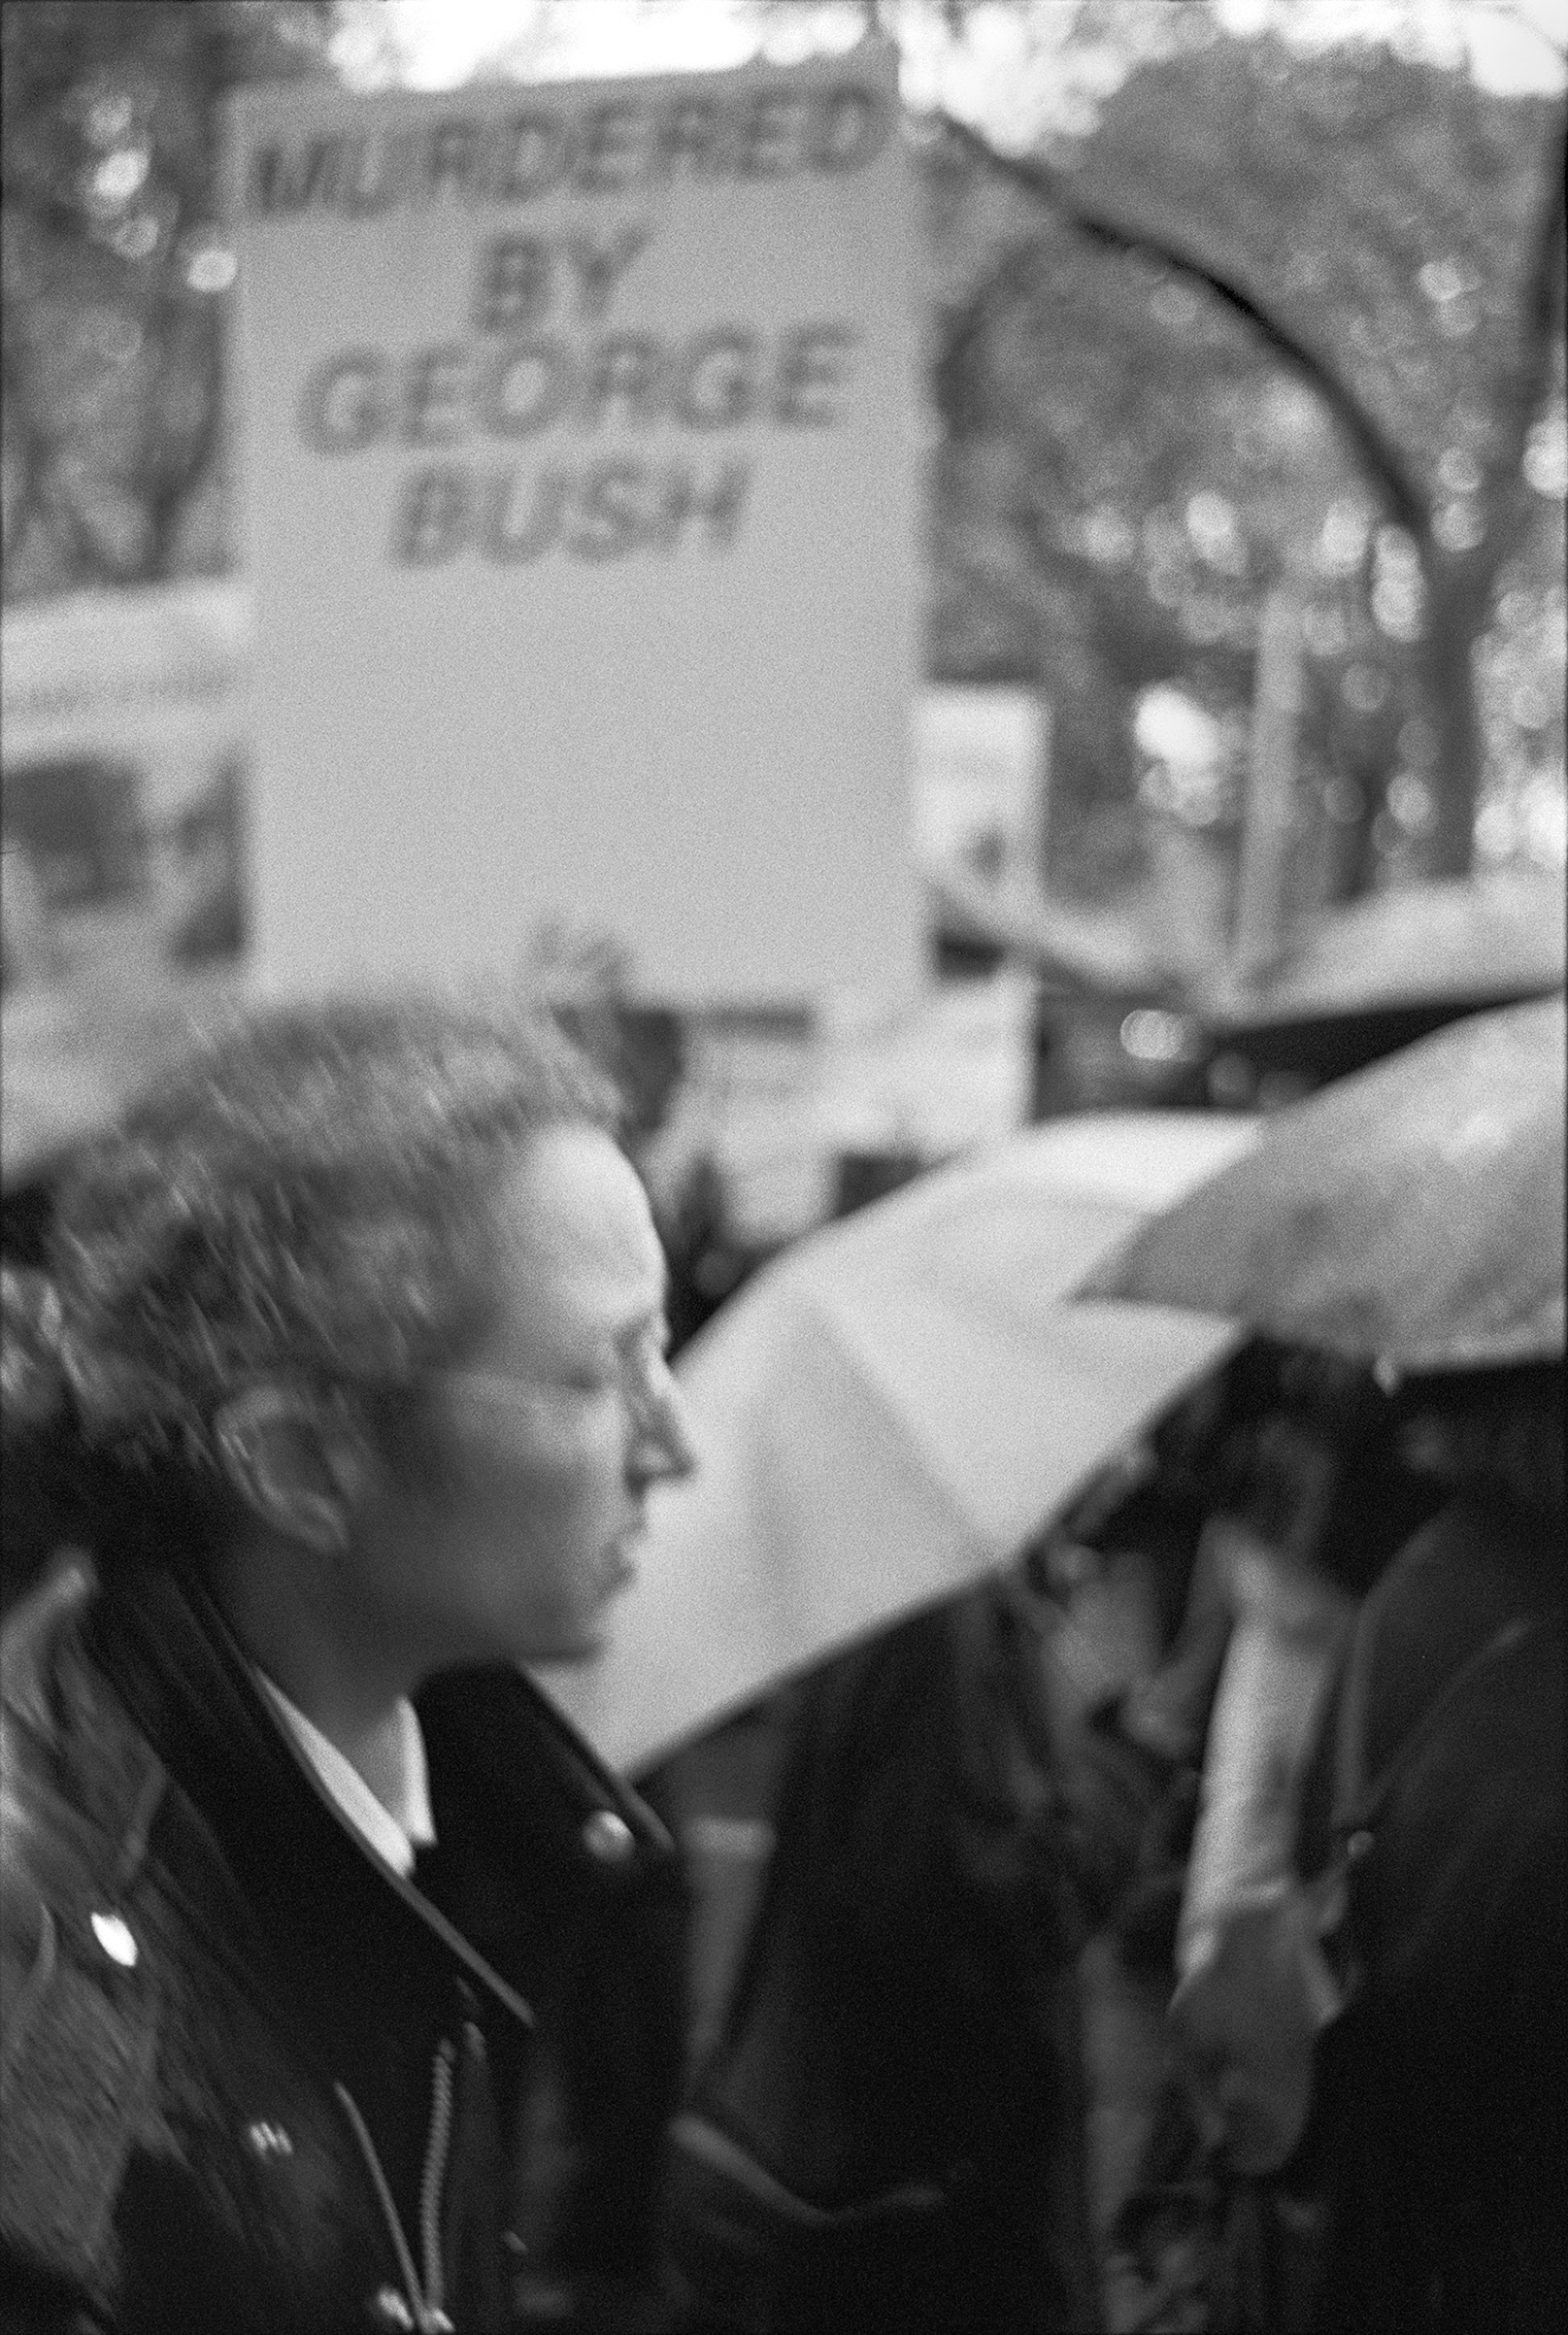 From the ACT UP funeral march carrying the body of Mark L. Fisher from Judson Memorial Church up Sixth Avenue to the Republican National Committee headquarters on the eve of the presidential election, 1992.